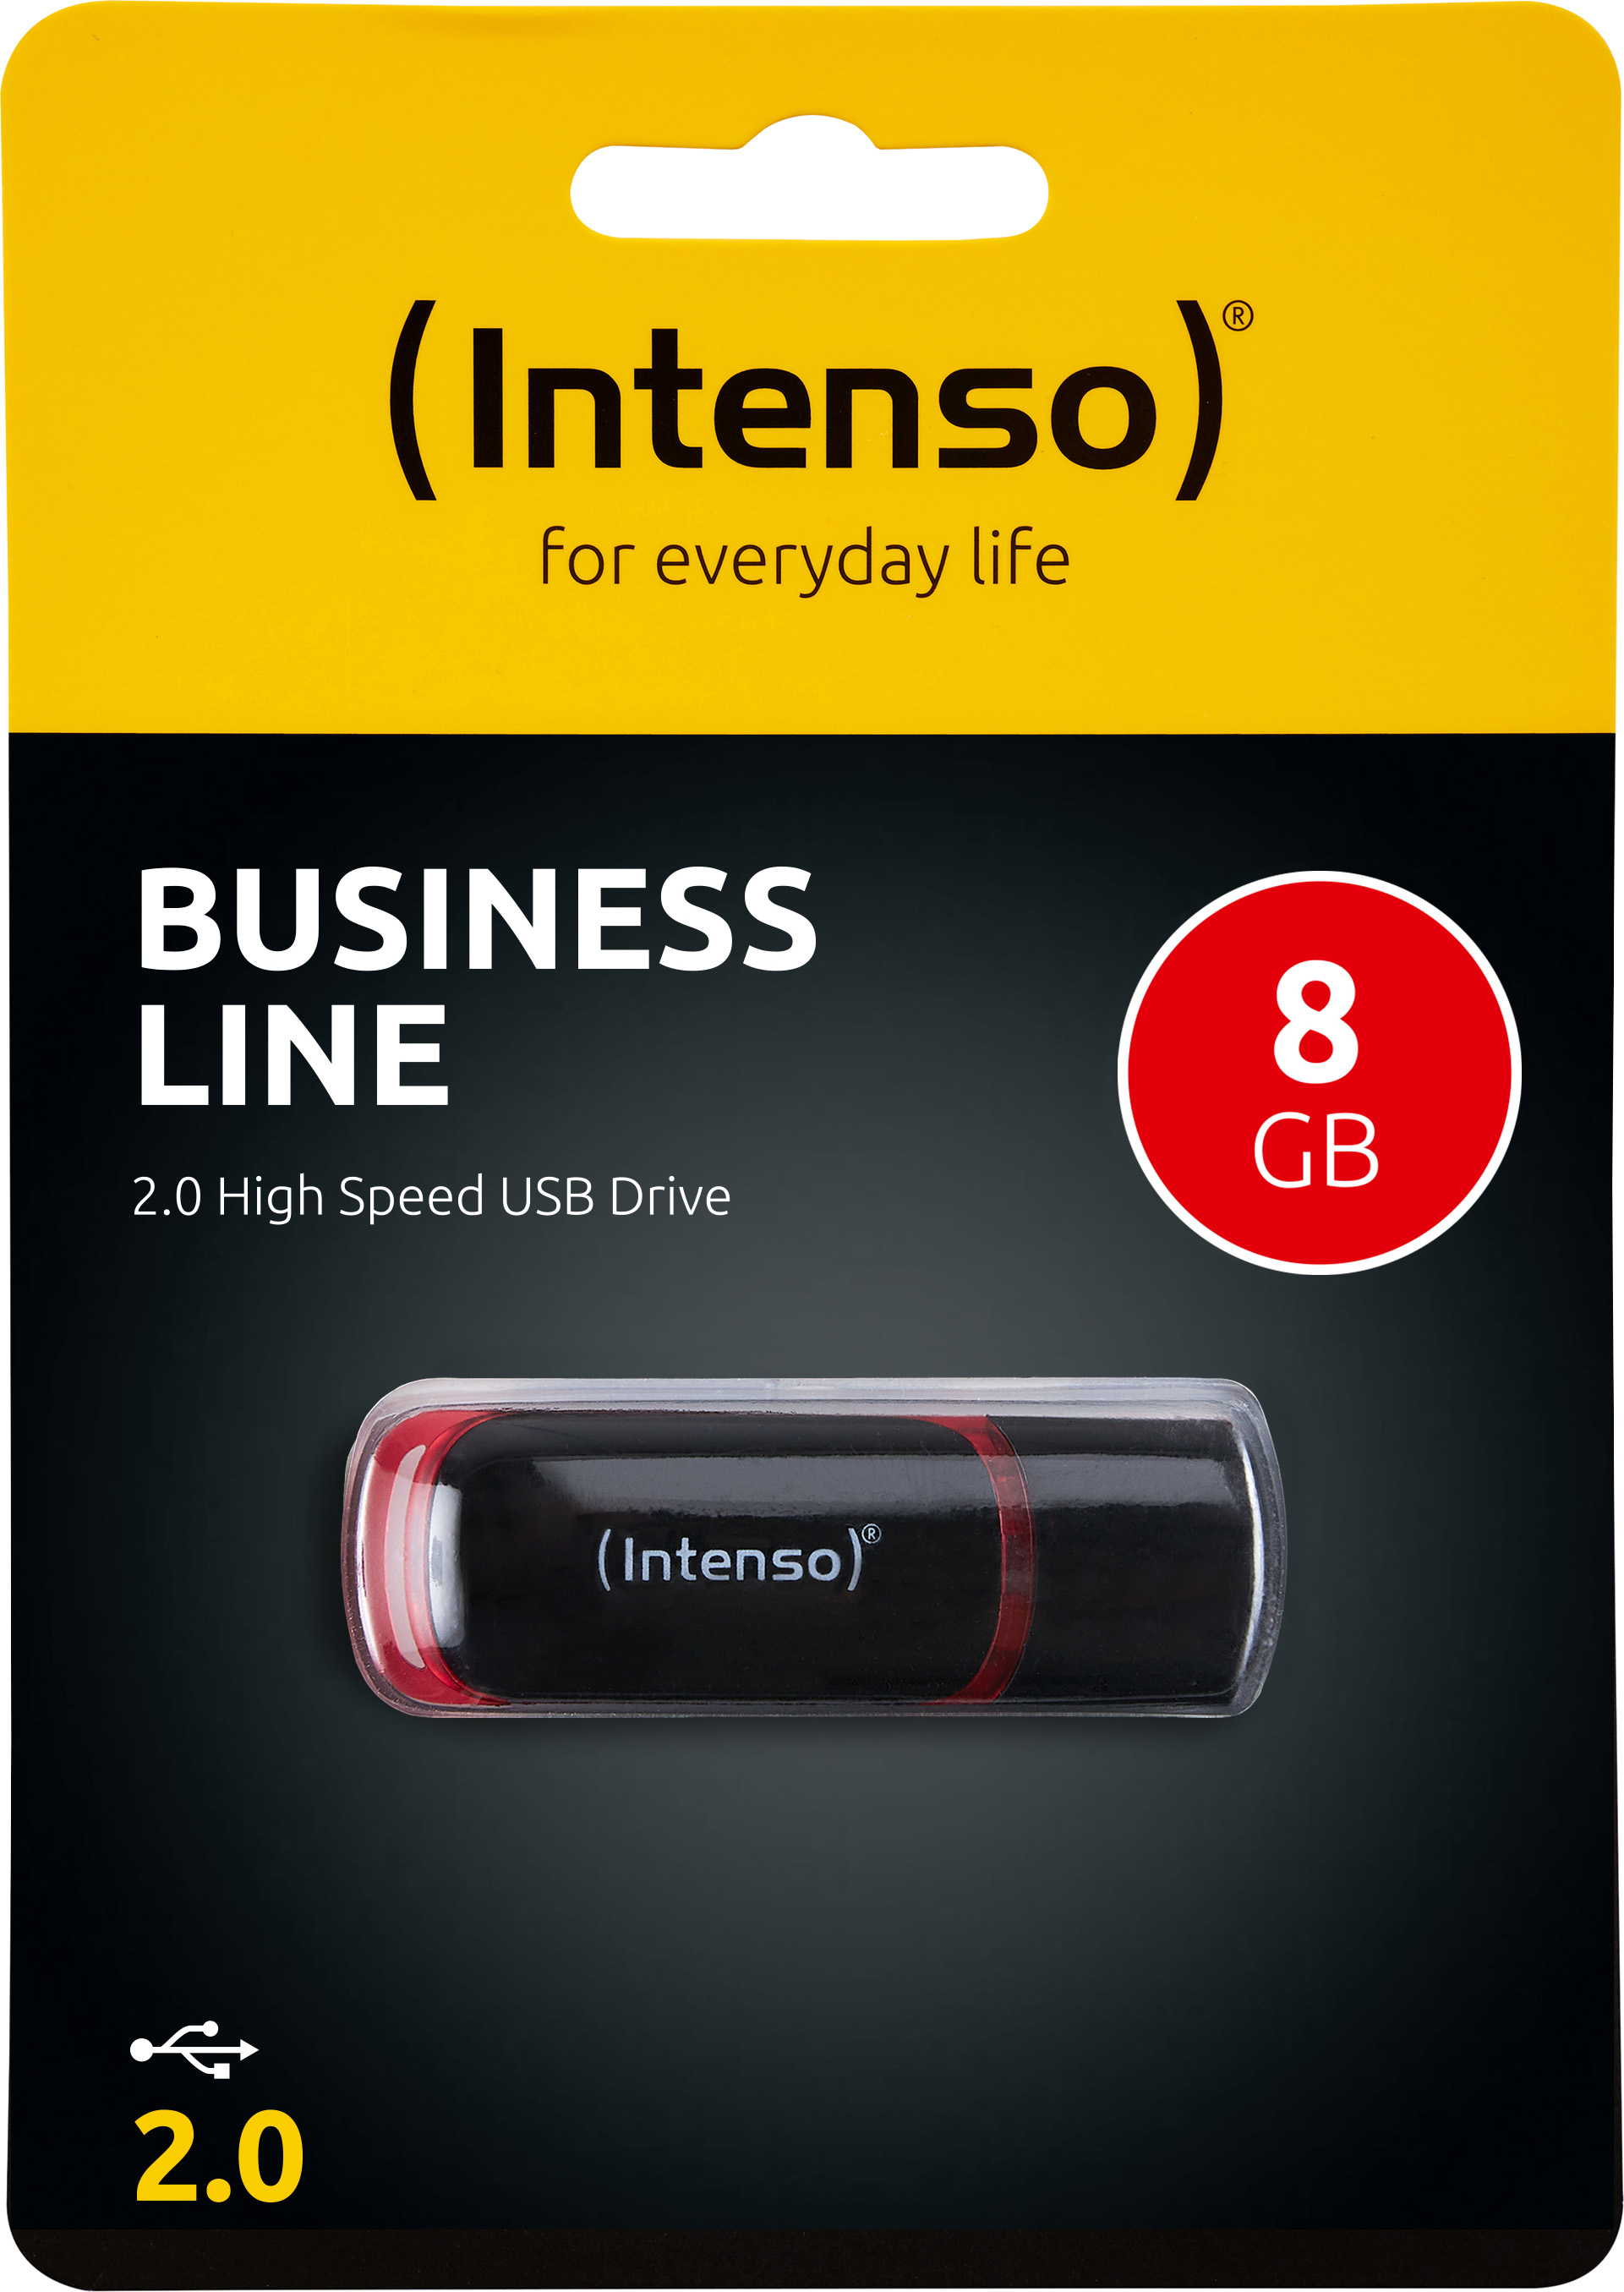 Intenso USB 2.0 Stick 8GB, Business Line, schwarz (R) 28MB/s, (W) 6.5MB/s, Rectractable, Retail-Blister